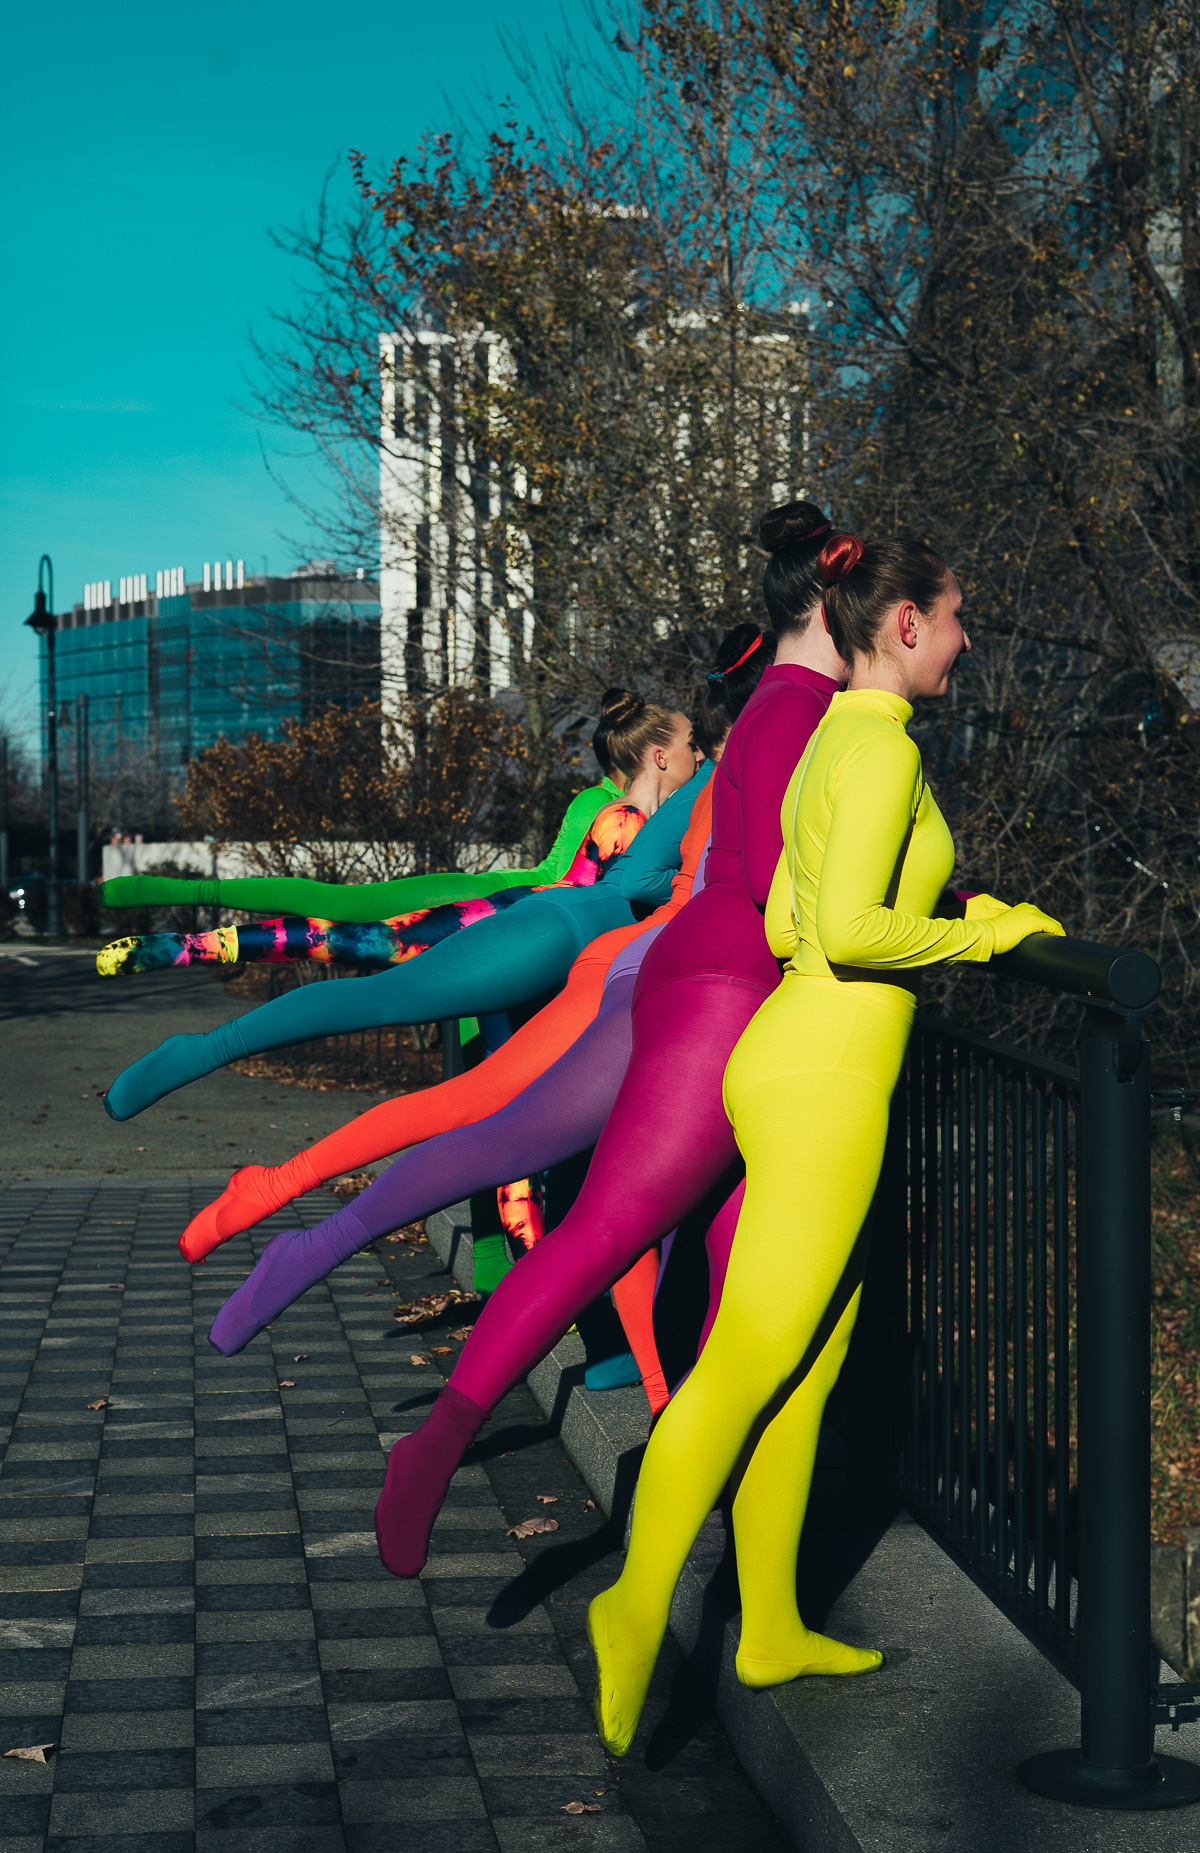 Dance Tights In Rainbow Colors - We Love Colors